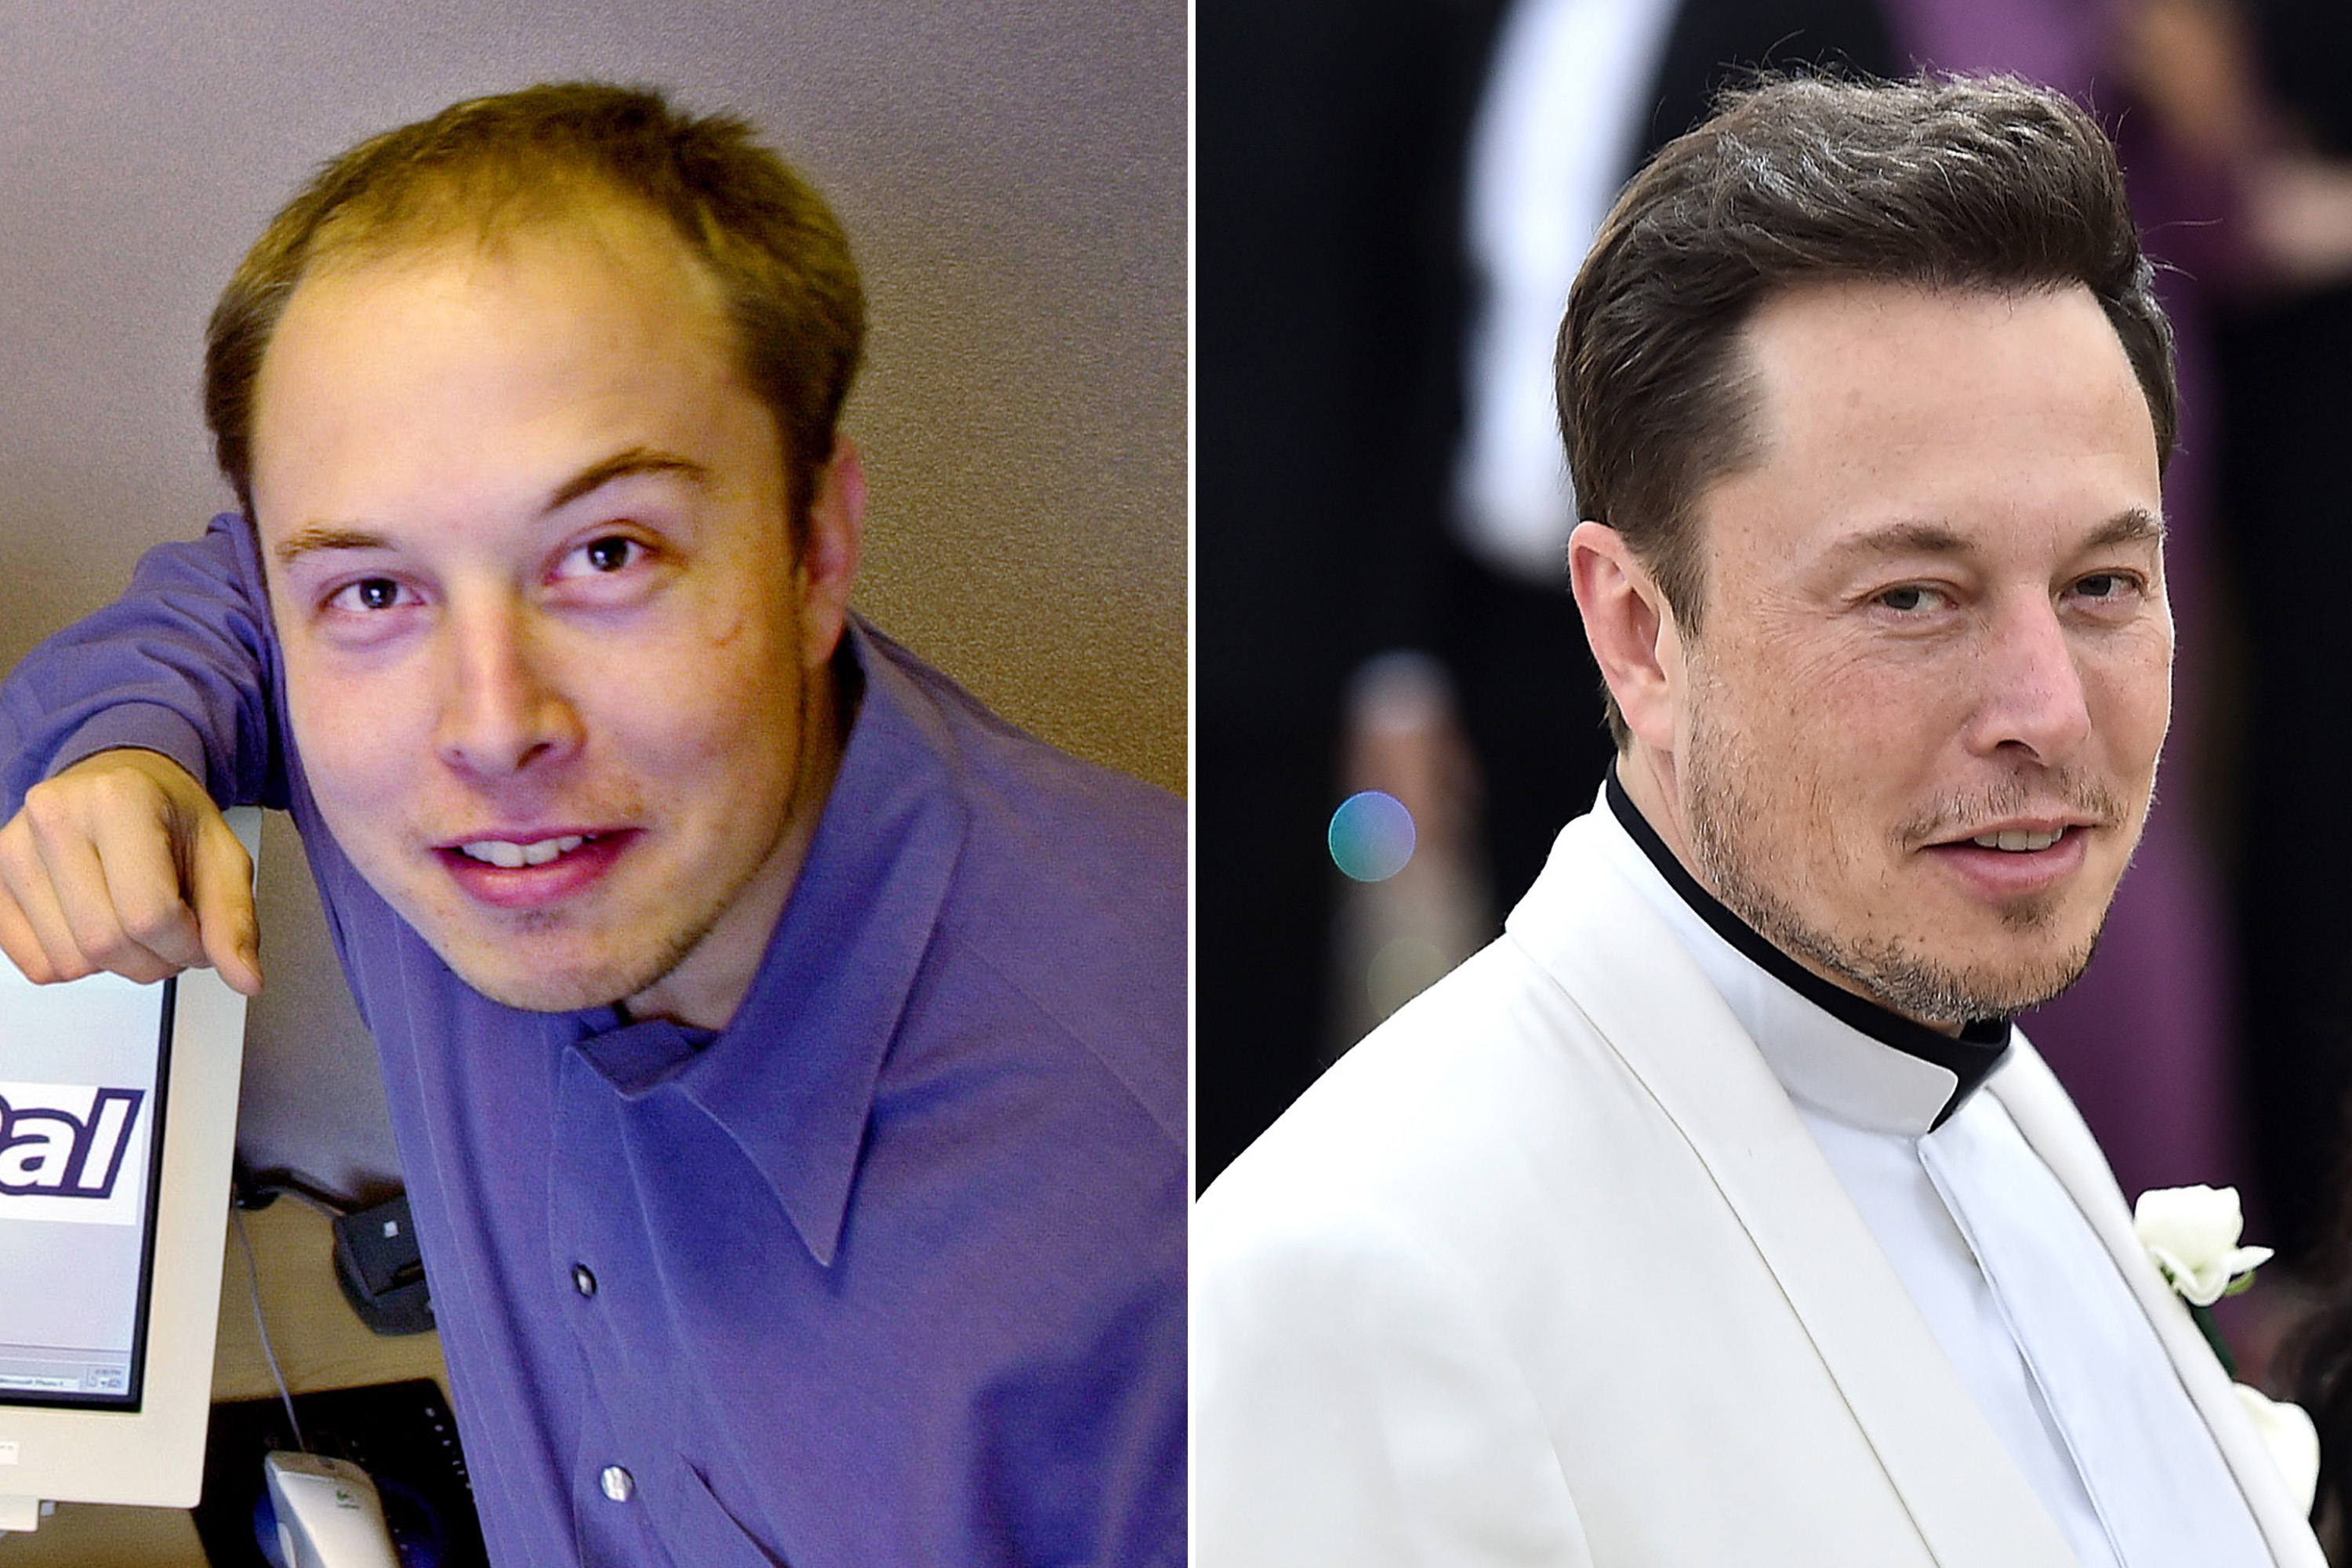 It's 'highly likely' Elon Musk spent over 20K on hair transplant